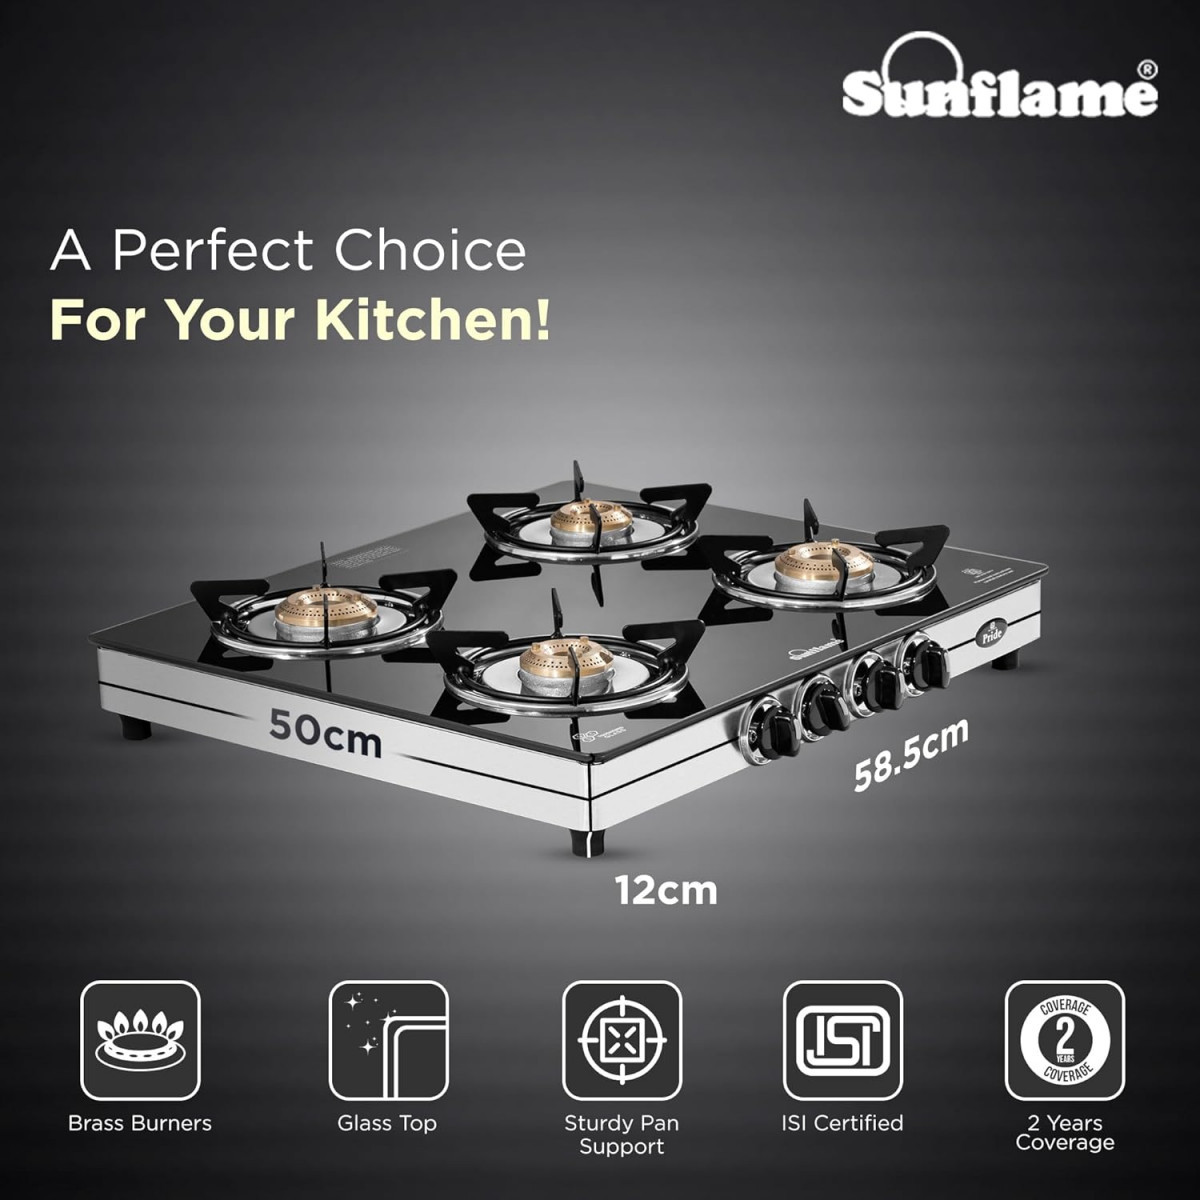 SUNFLAME Pride 4 Burner Open Gas Stove 2 Small And 2 Medium Brass Burners 2-Years Product Coverage Ergonomic Knobs Easy To Maintain L Toughened Glass Top Pan India Presence